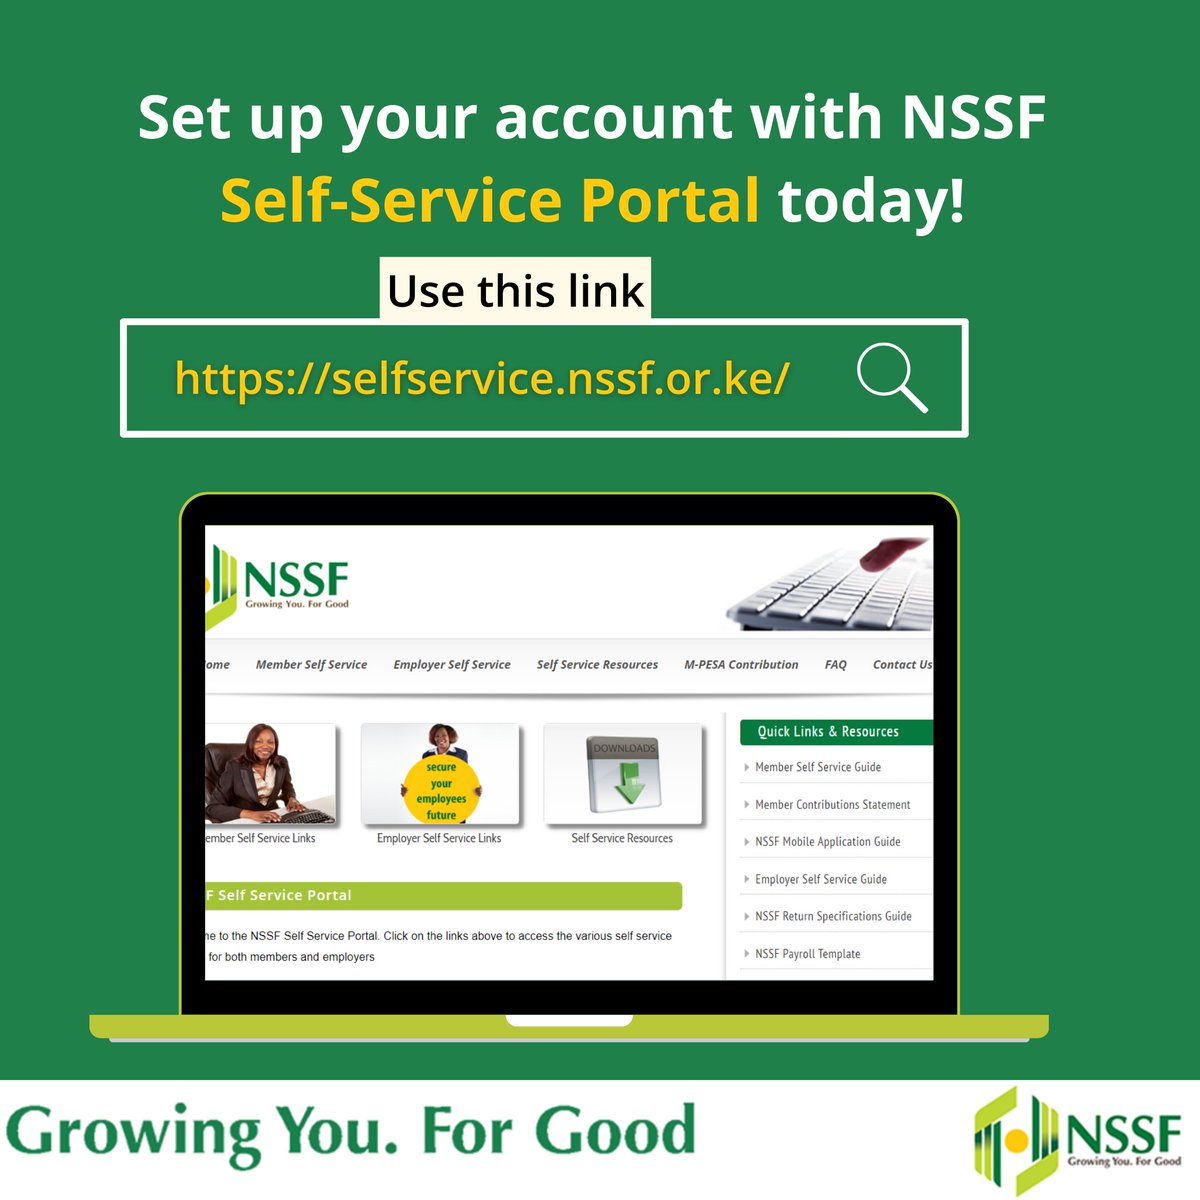 NSSF self-service portal lets you be your boss. It puts the power to access information into your hands and get all the information and assistance you need from NSSF. Click on this link selfservice.nssf.or.ke and register today! #LeavingNoOneBehind